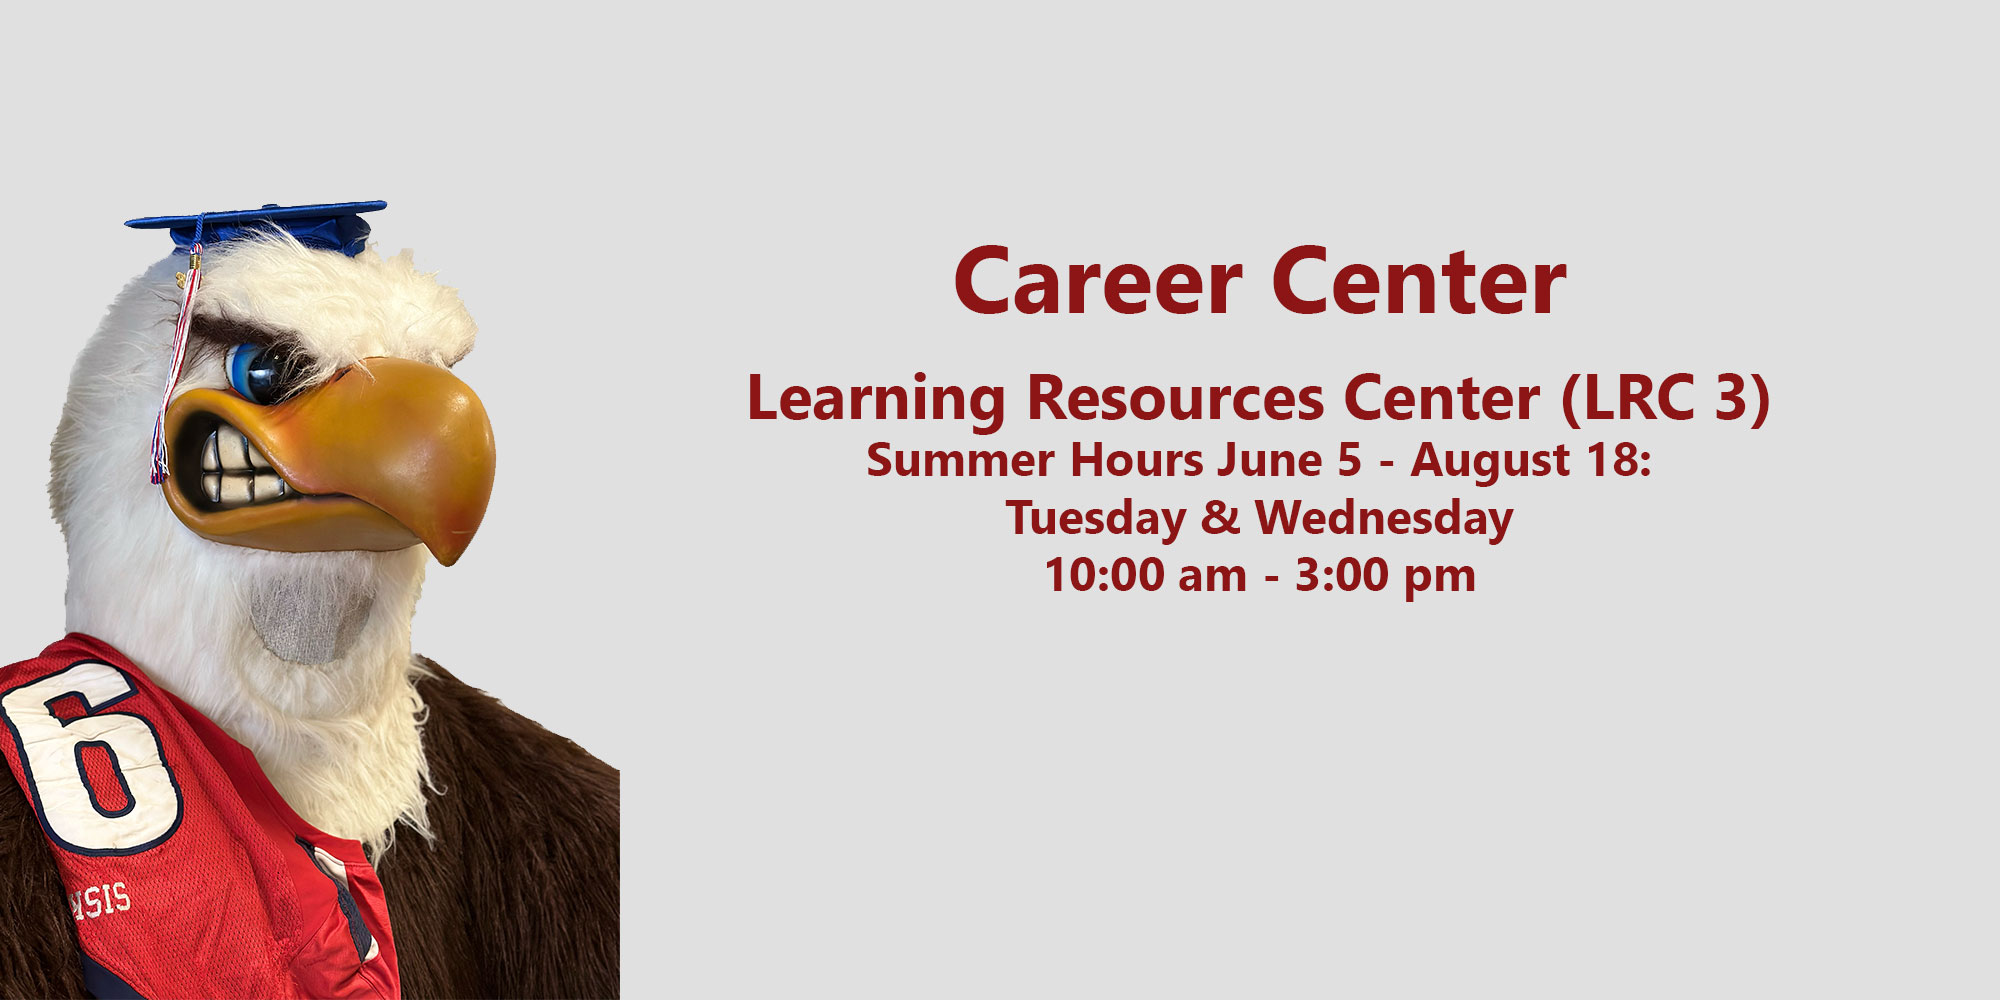 Career Center. Learning Resources Center (LRC 3). Summer Hours June 5 - August 18. Tuesday & Wednesday 10:00 am - 3:00 pm.